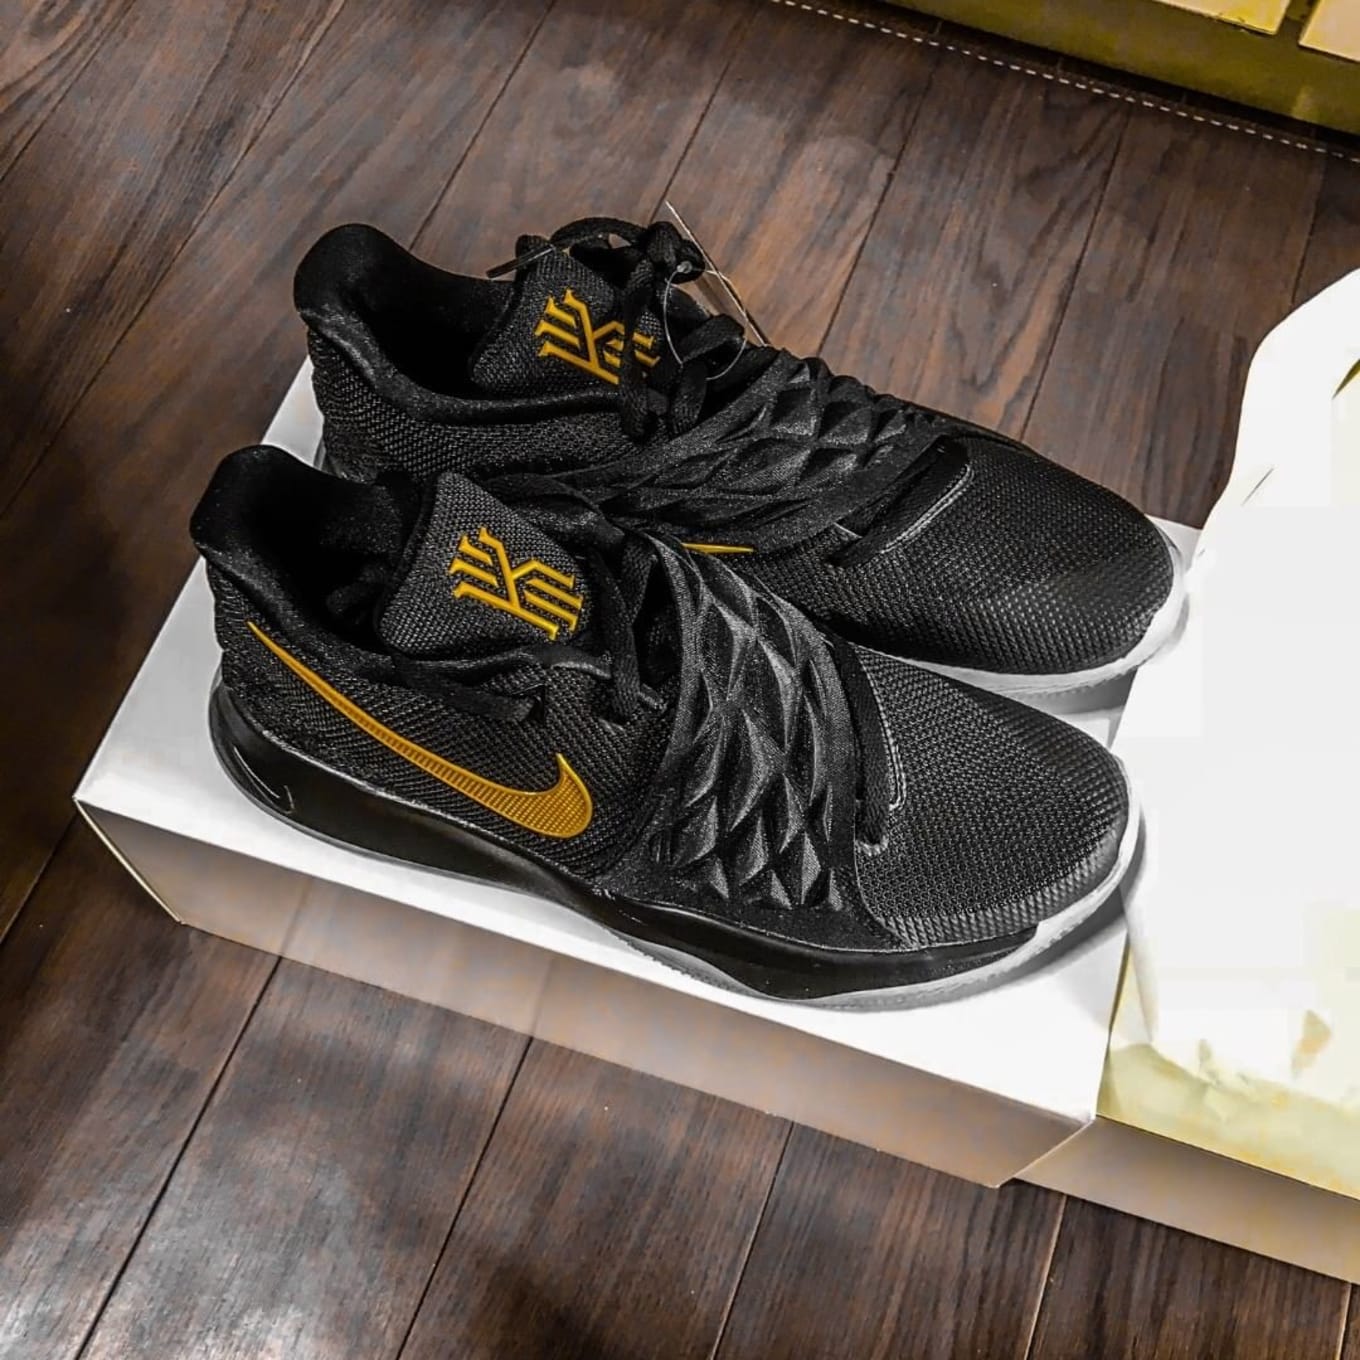 kyrie low 2 black gold